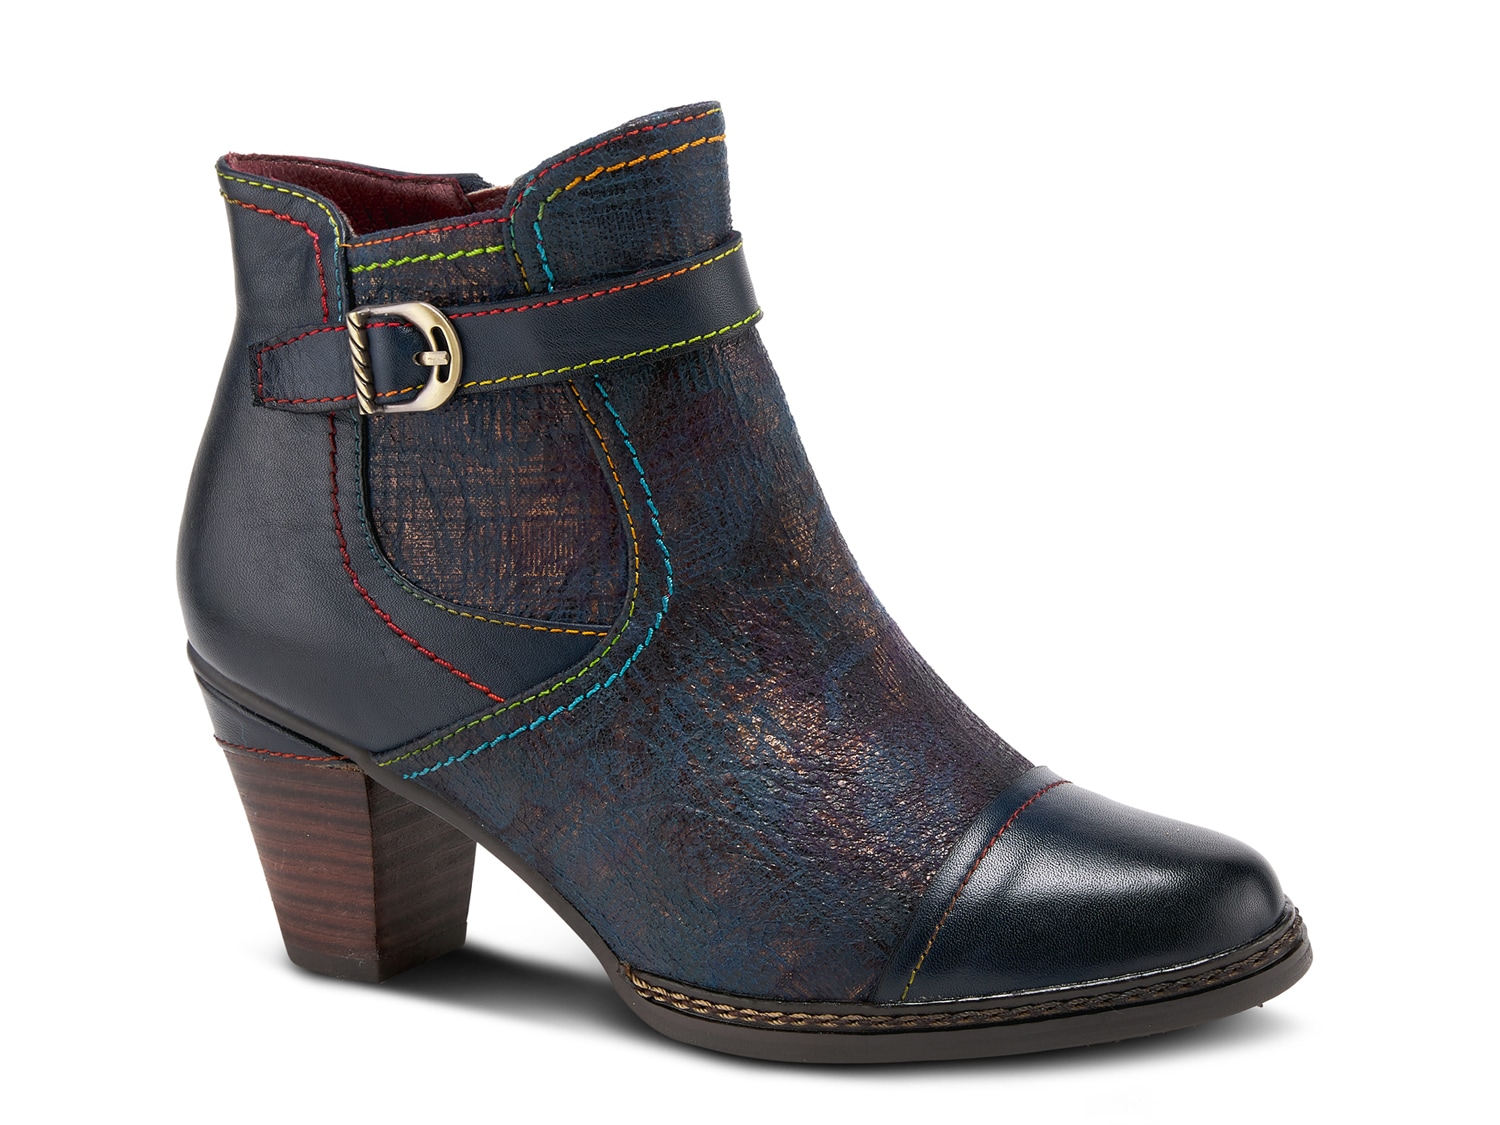 L'Artiste by Spring Step Captivate Bootie - Free Shipping | DSW